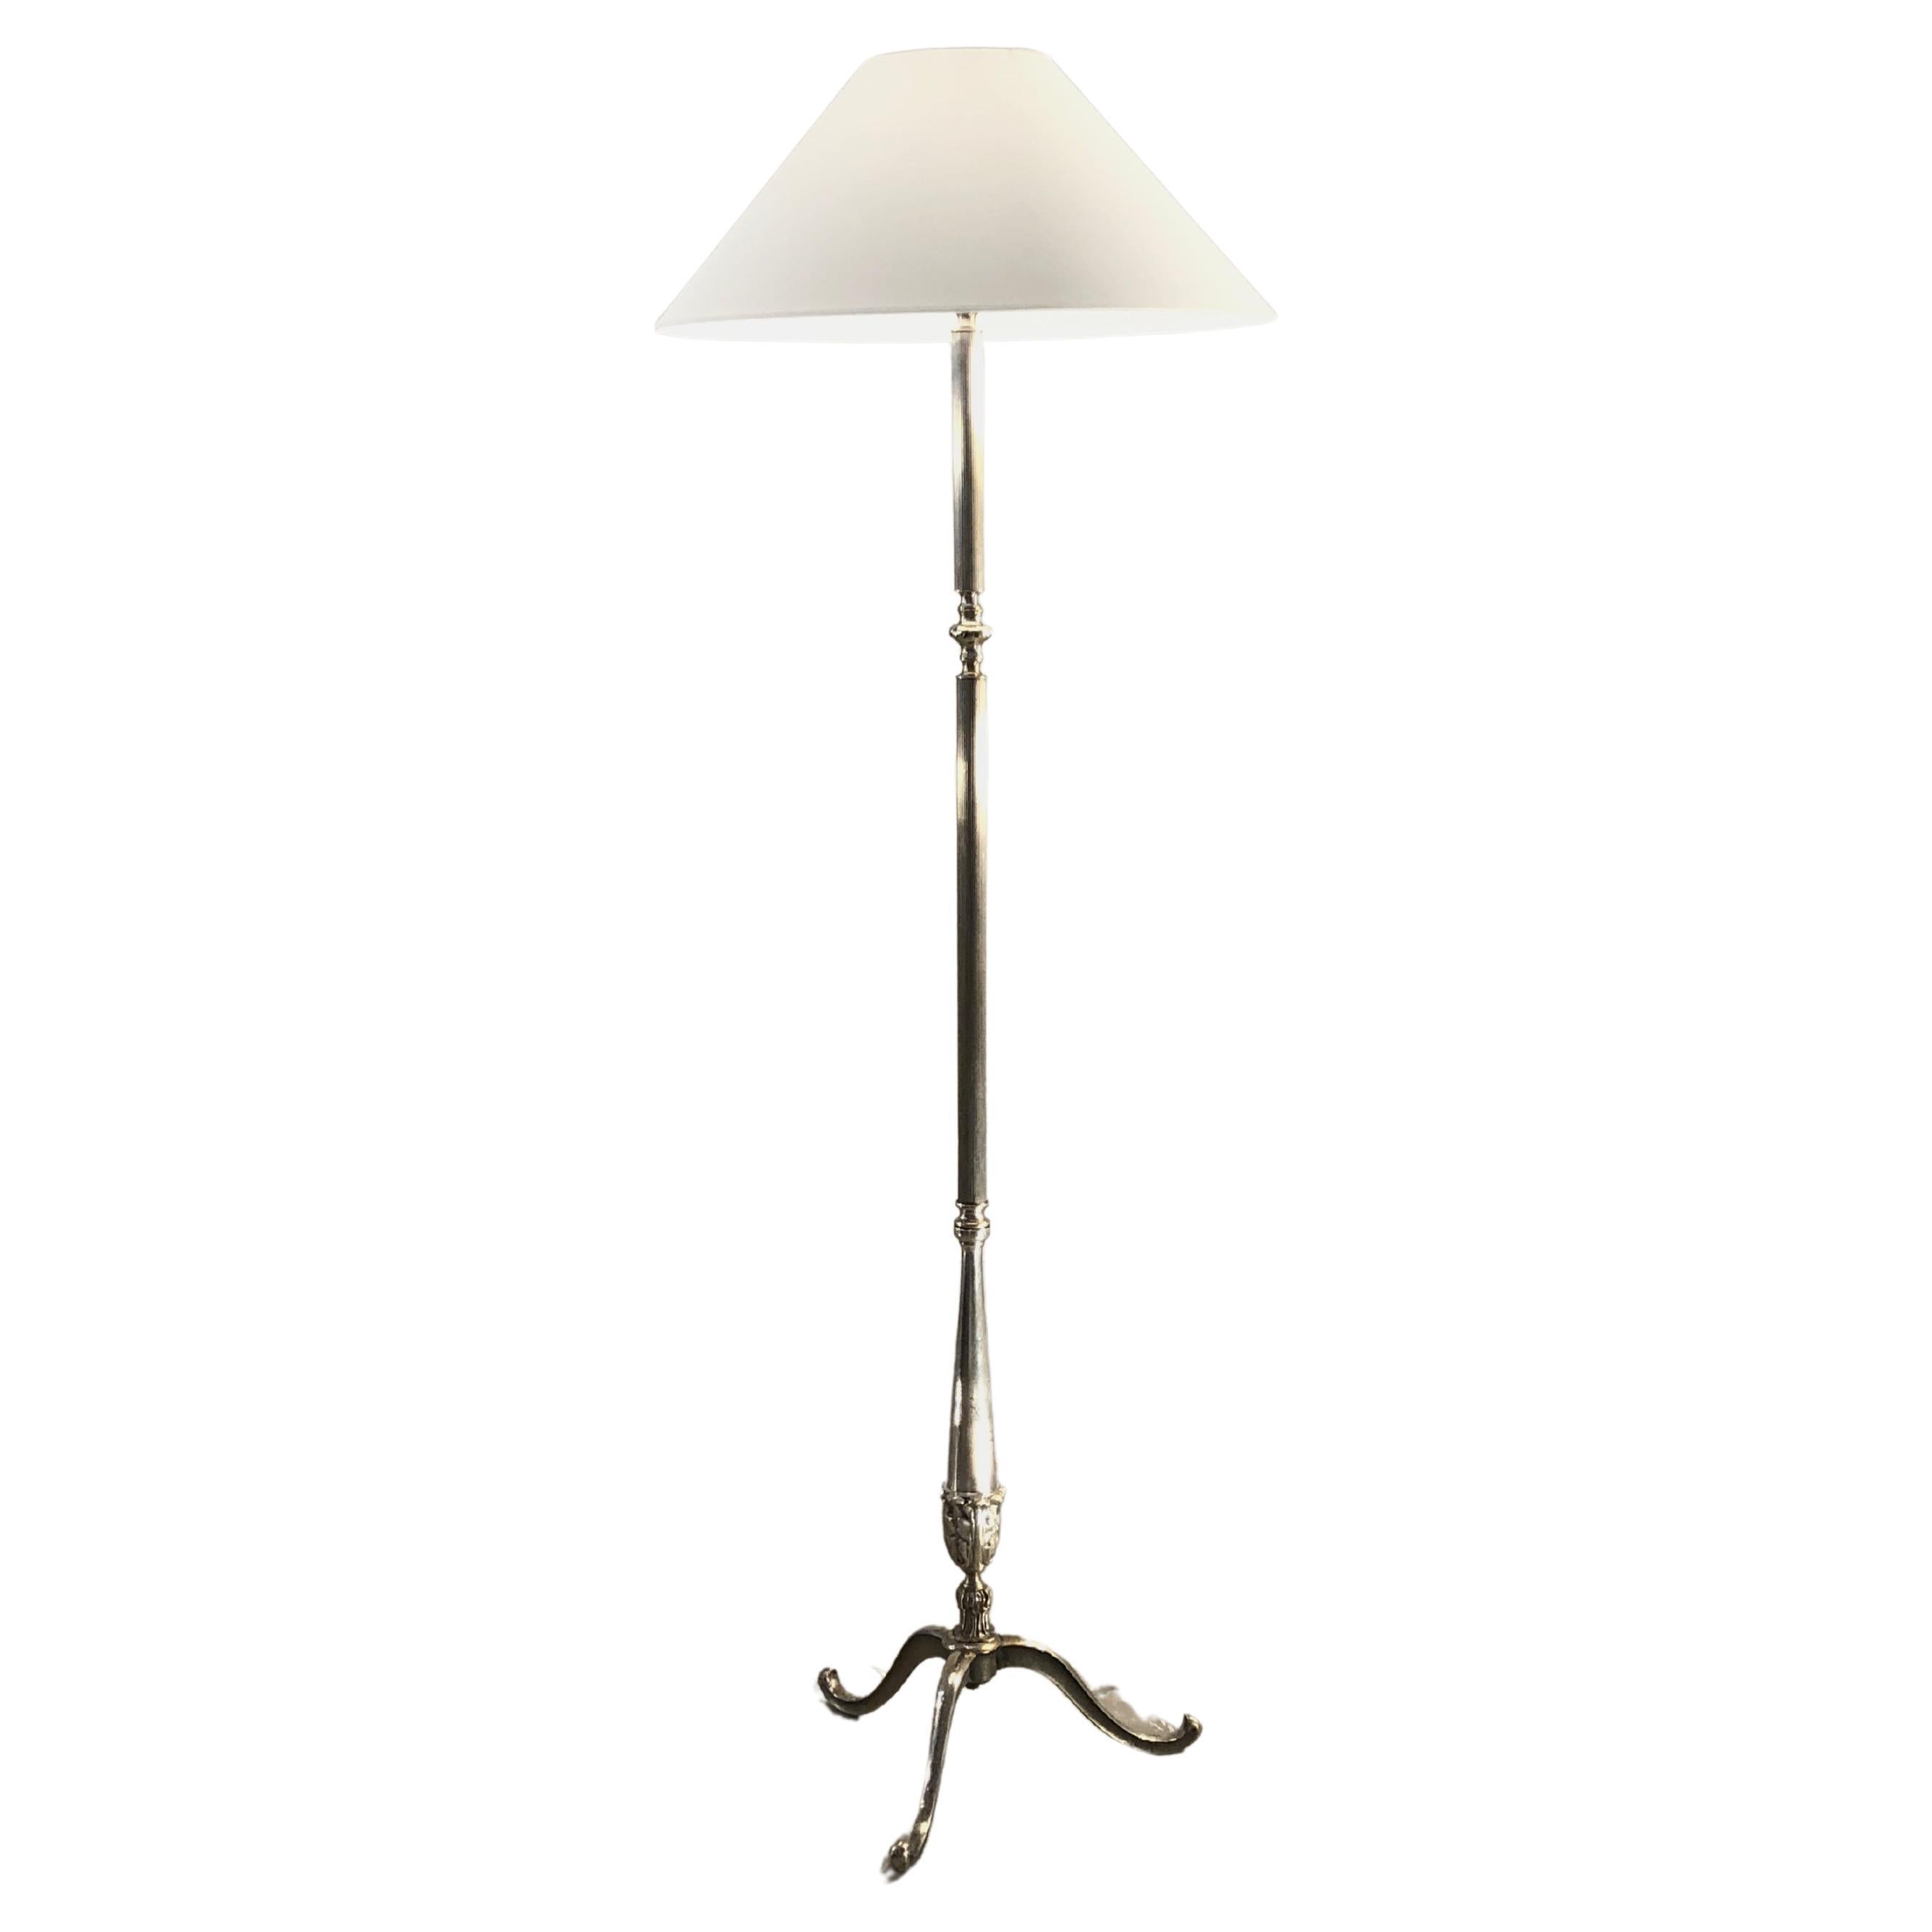 A SHABBY-CHIC Luxurious NEOCLASSICAL Silvered Bronze FLOOR LAMP, France 1970